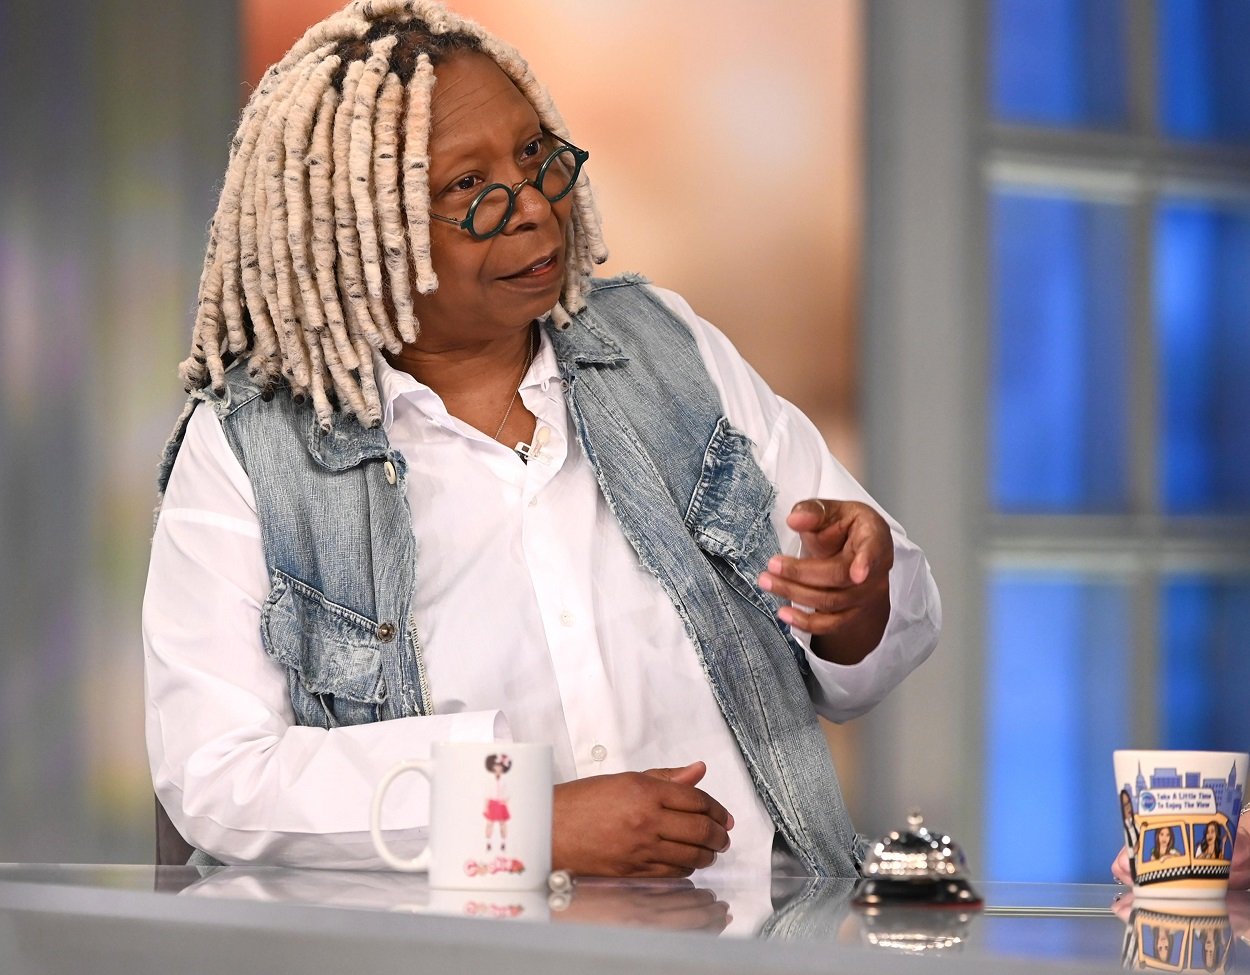 Whoopi Goldberg co-hosting an episode of The View